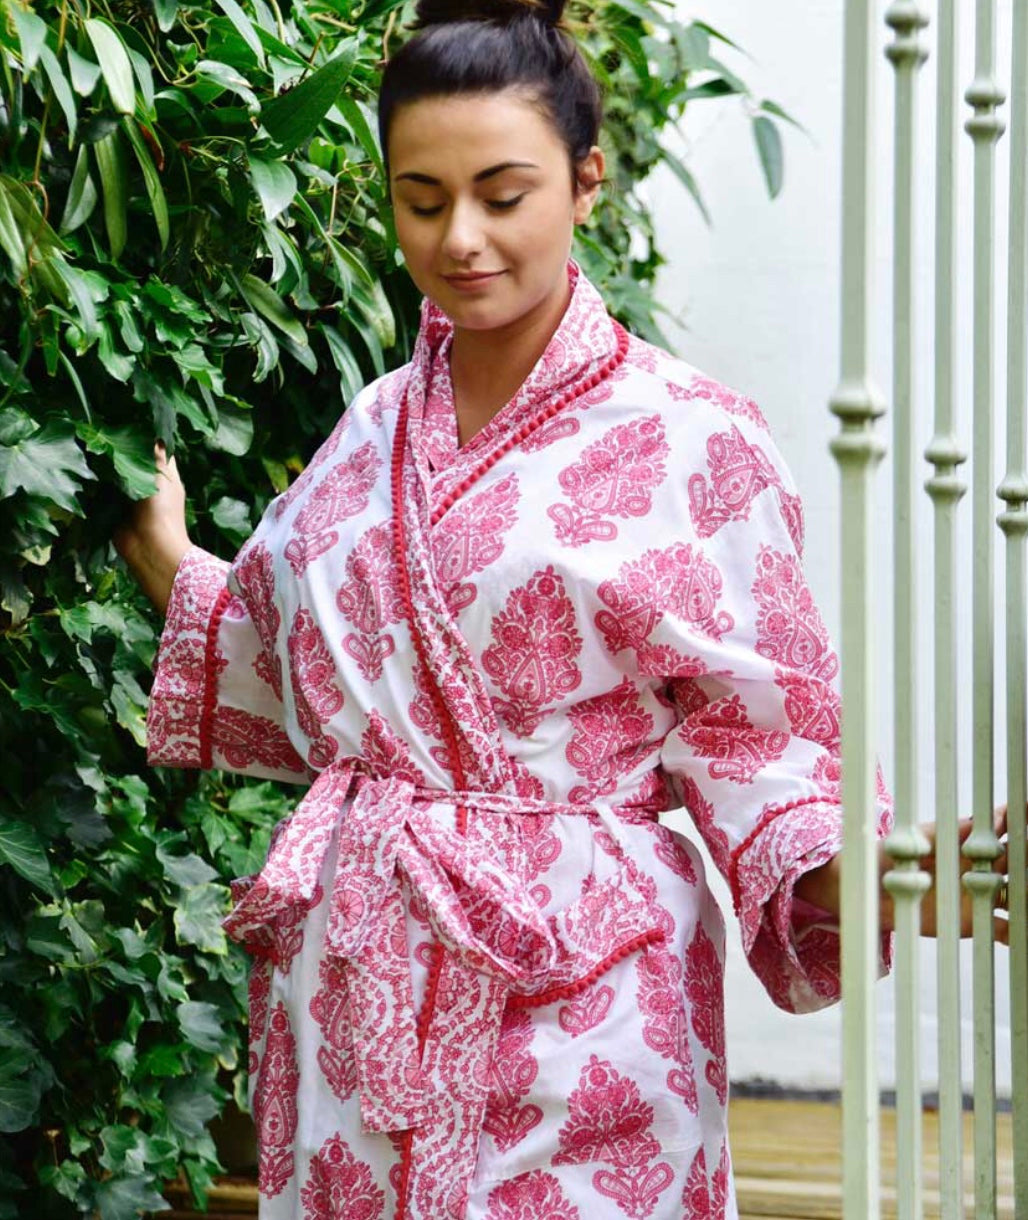 COTTON DRESSING GOWN - PINK PAISLEY